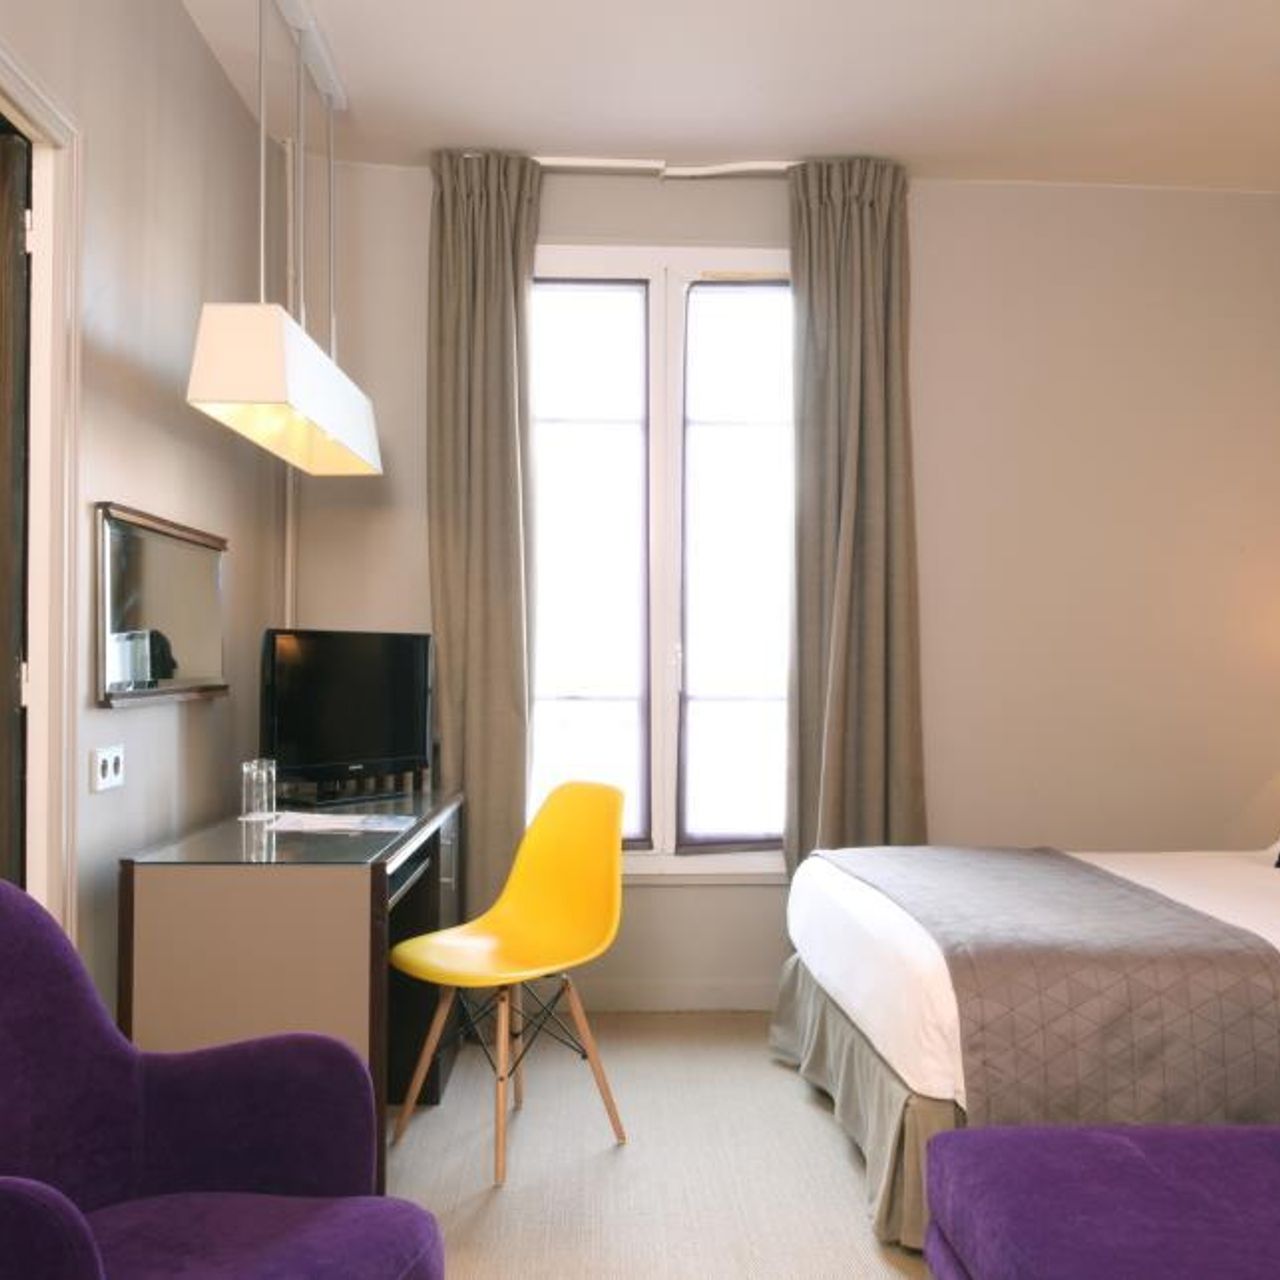 Little Palace Hotel - Paris - Great prices at HOTEL INFO